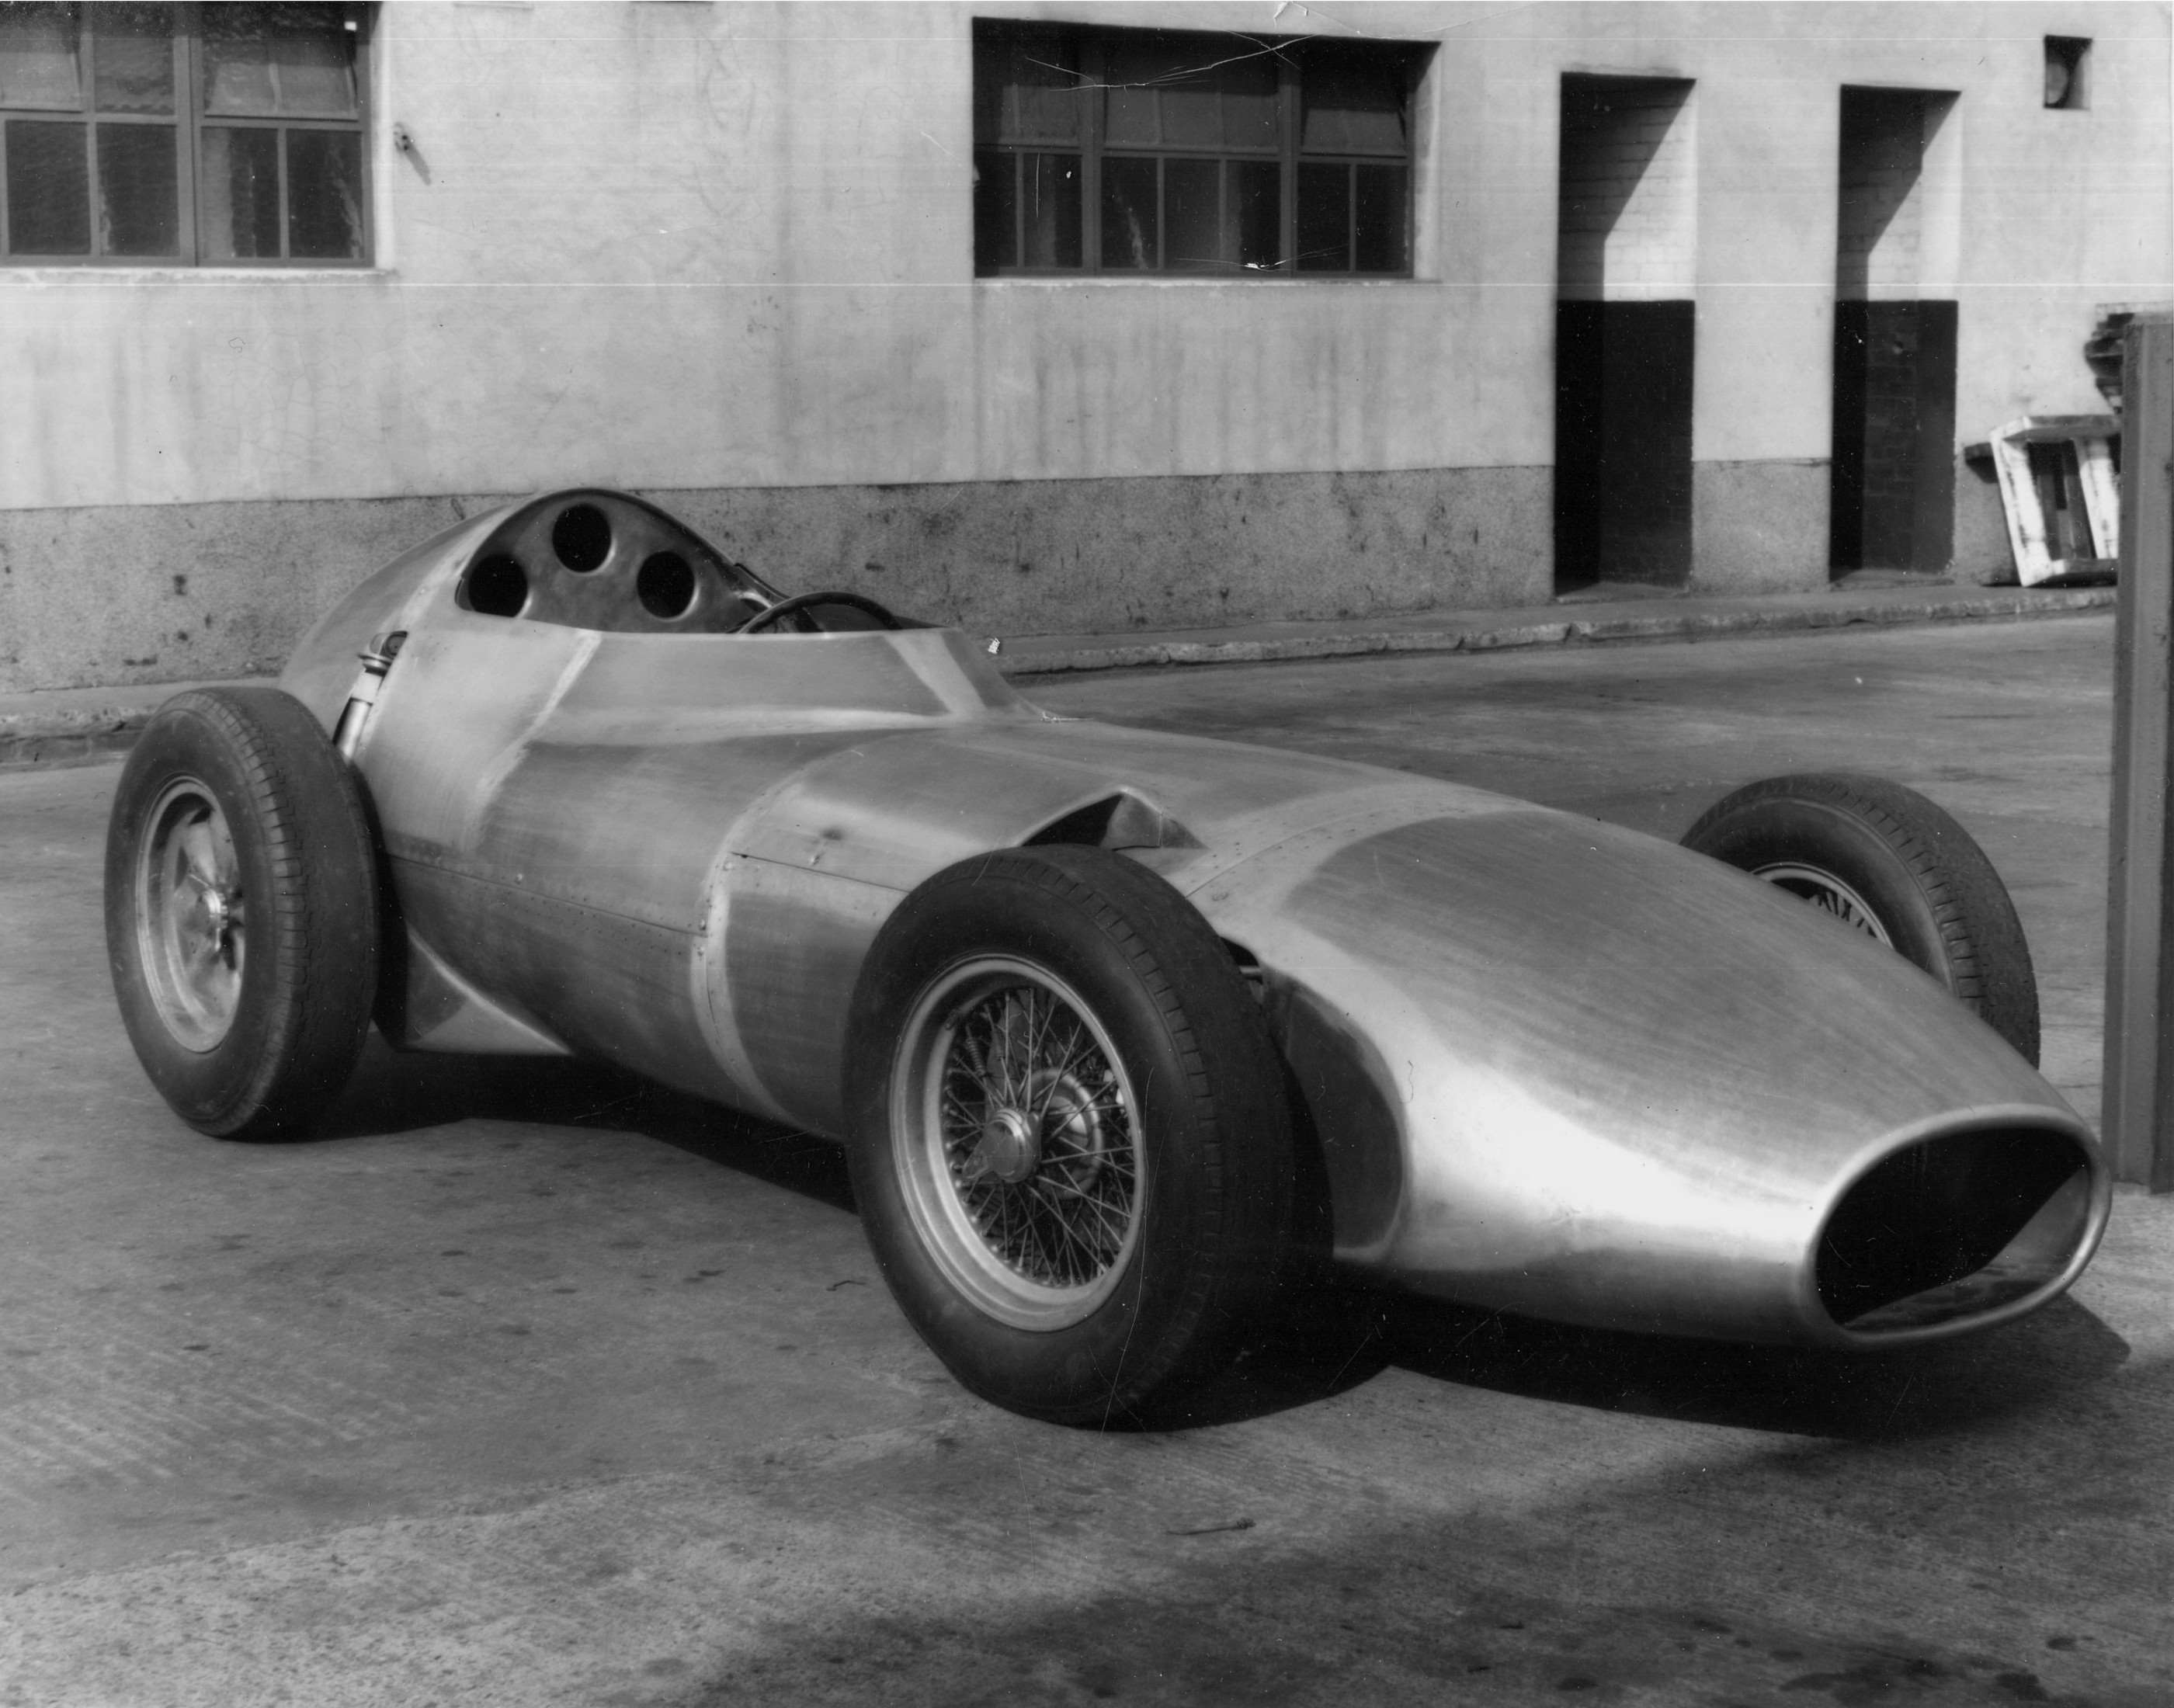 Straight-grained aluminium panels - not hand-hammered - as rolled on The British Wheel clothed the ‘Lowline’ Vanwall as raced at Goodwood Easter Monday, 1959
